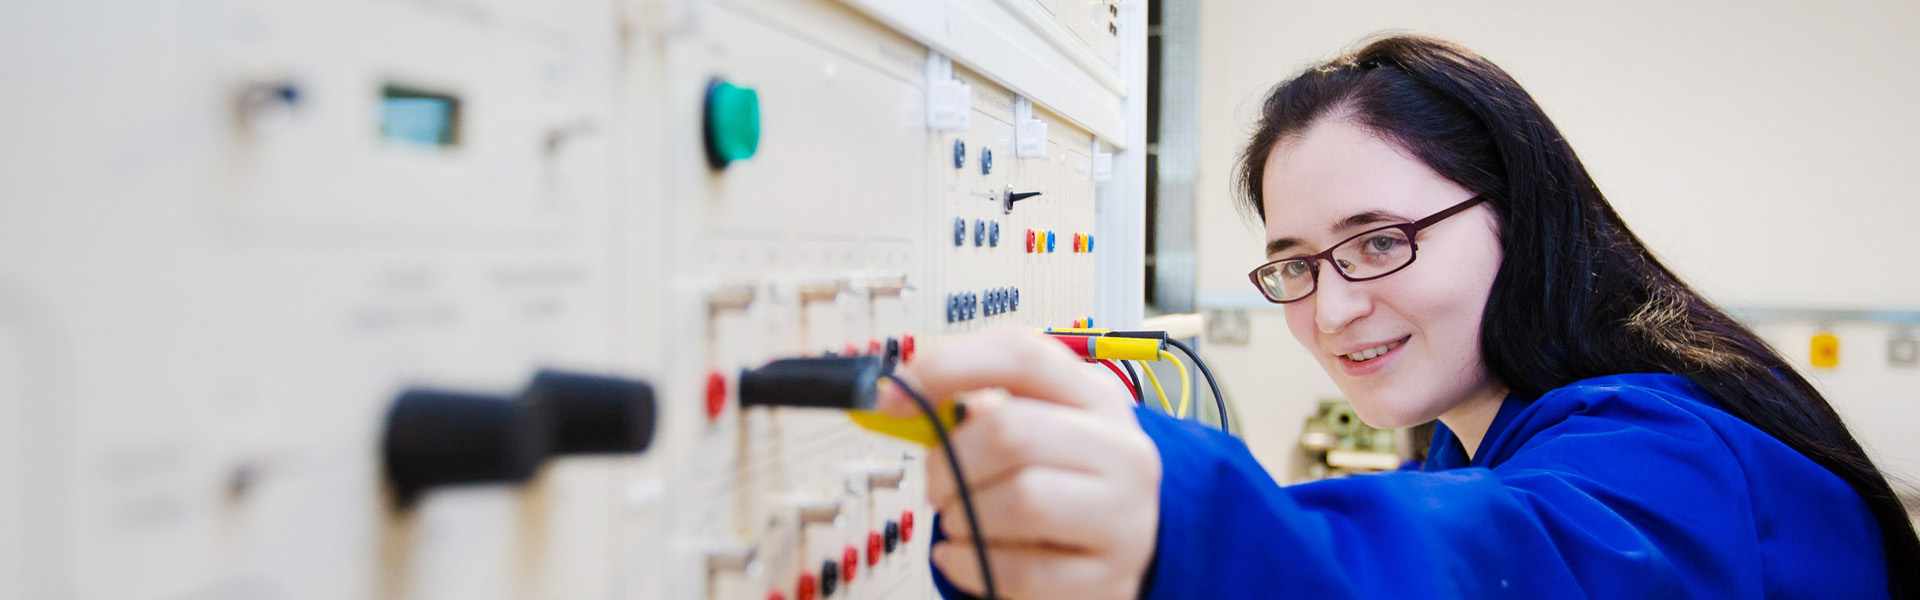 An Engineering student operates some electrical equipment.